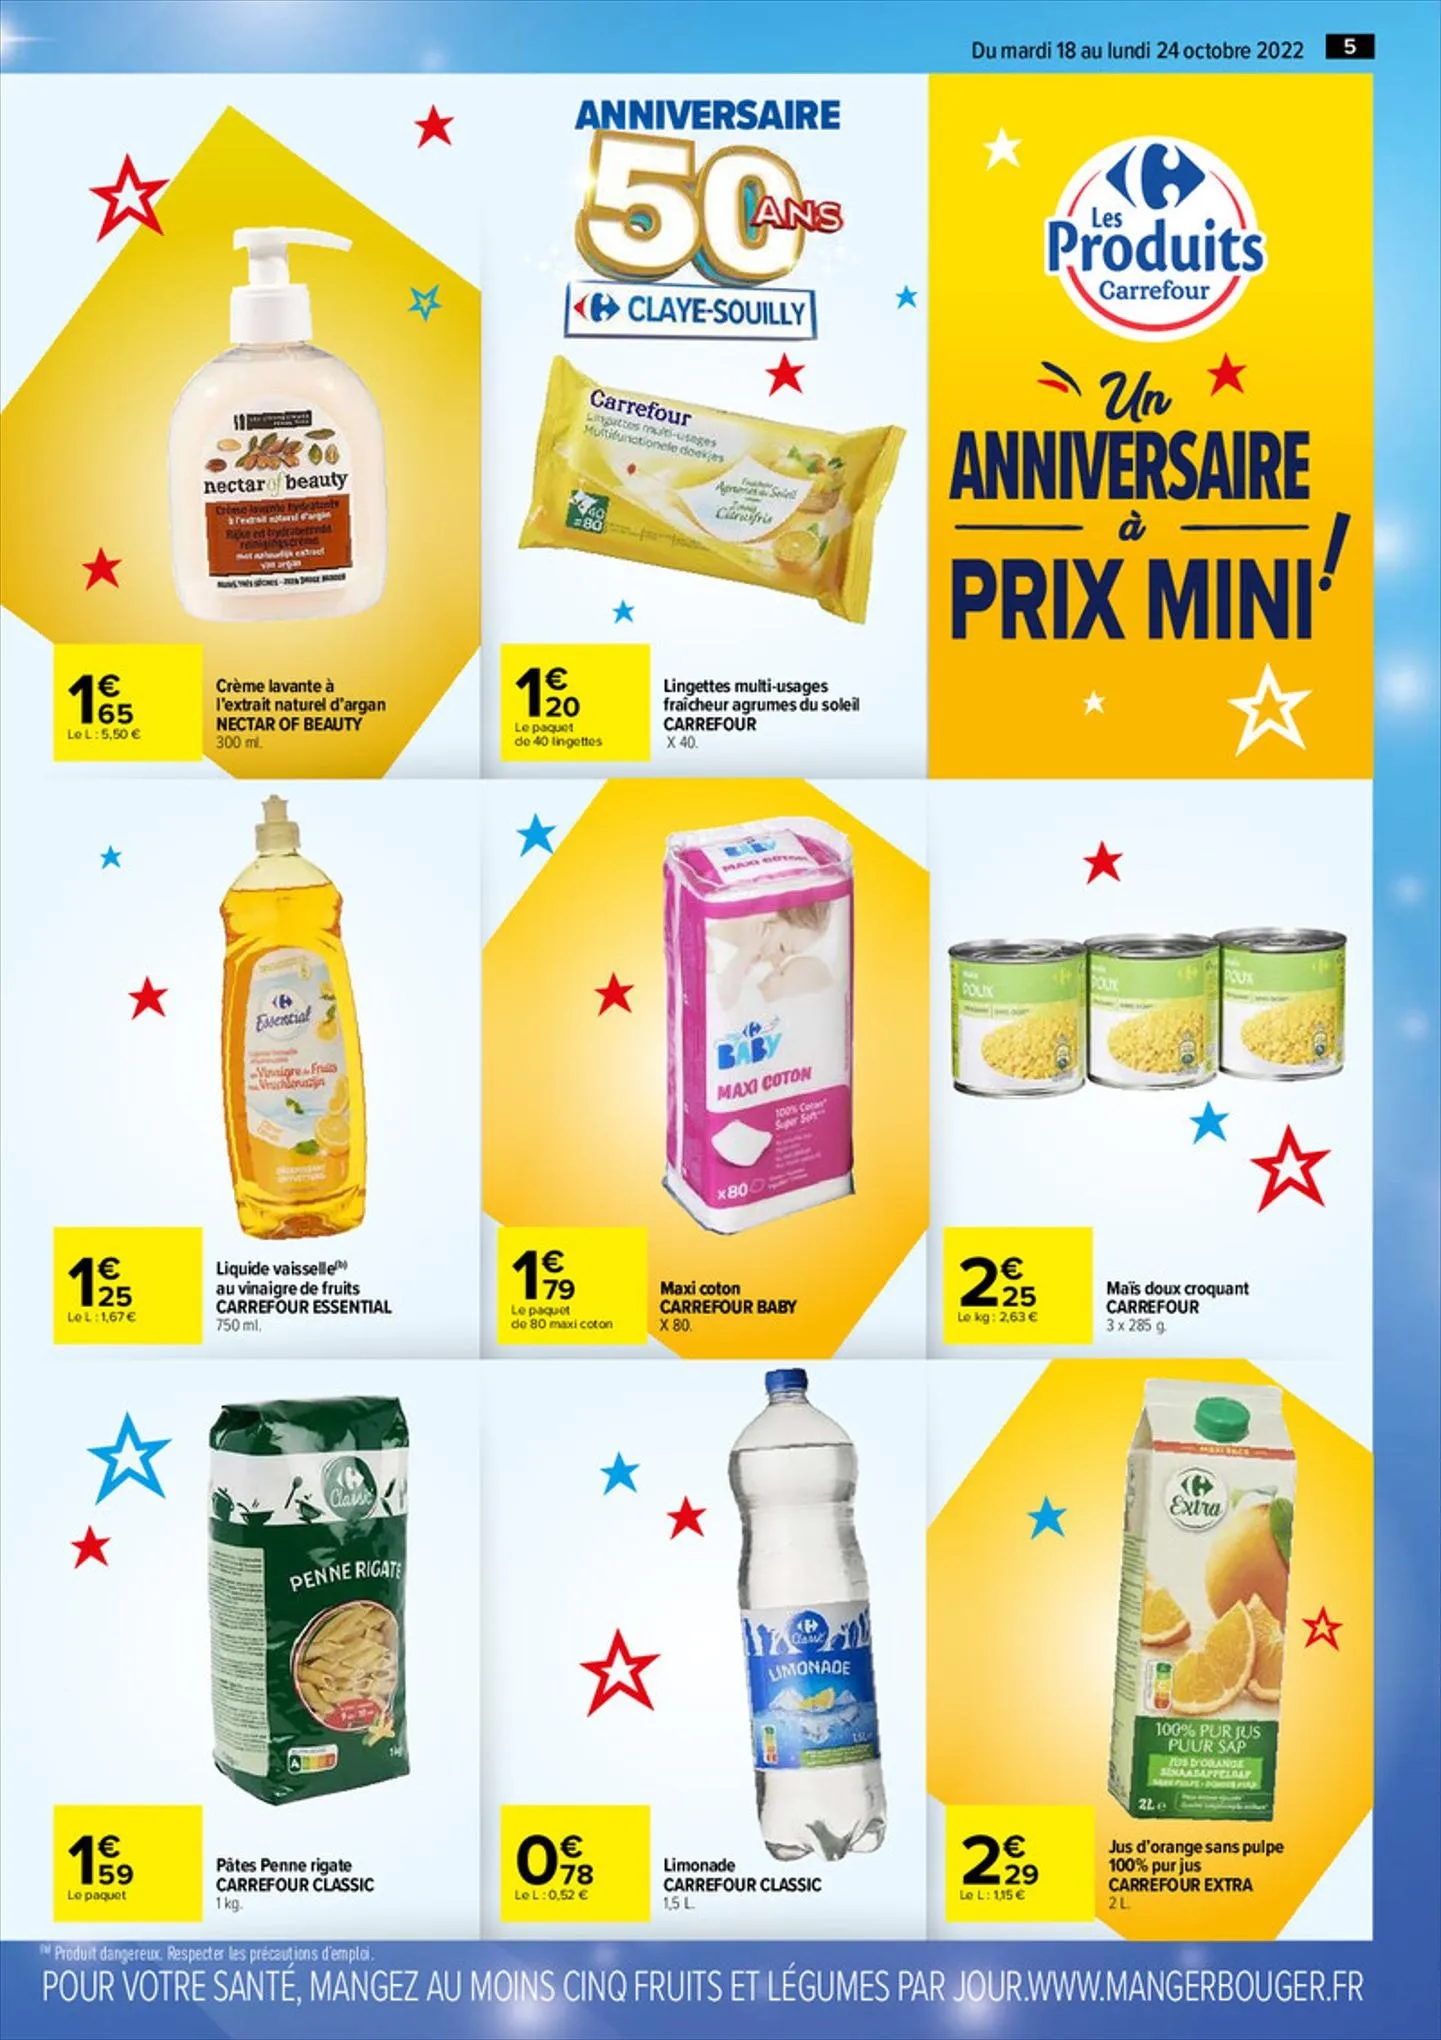 Catalogue Anniversaire 50 Ans Claye-Souilly, page 00005